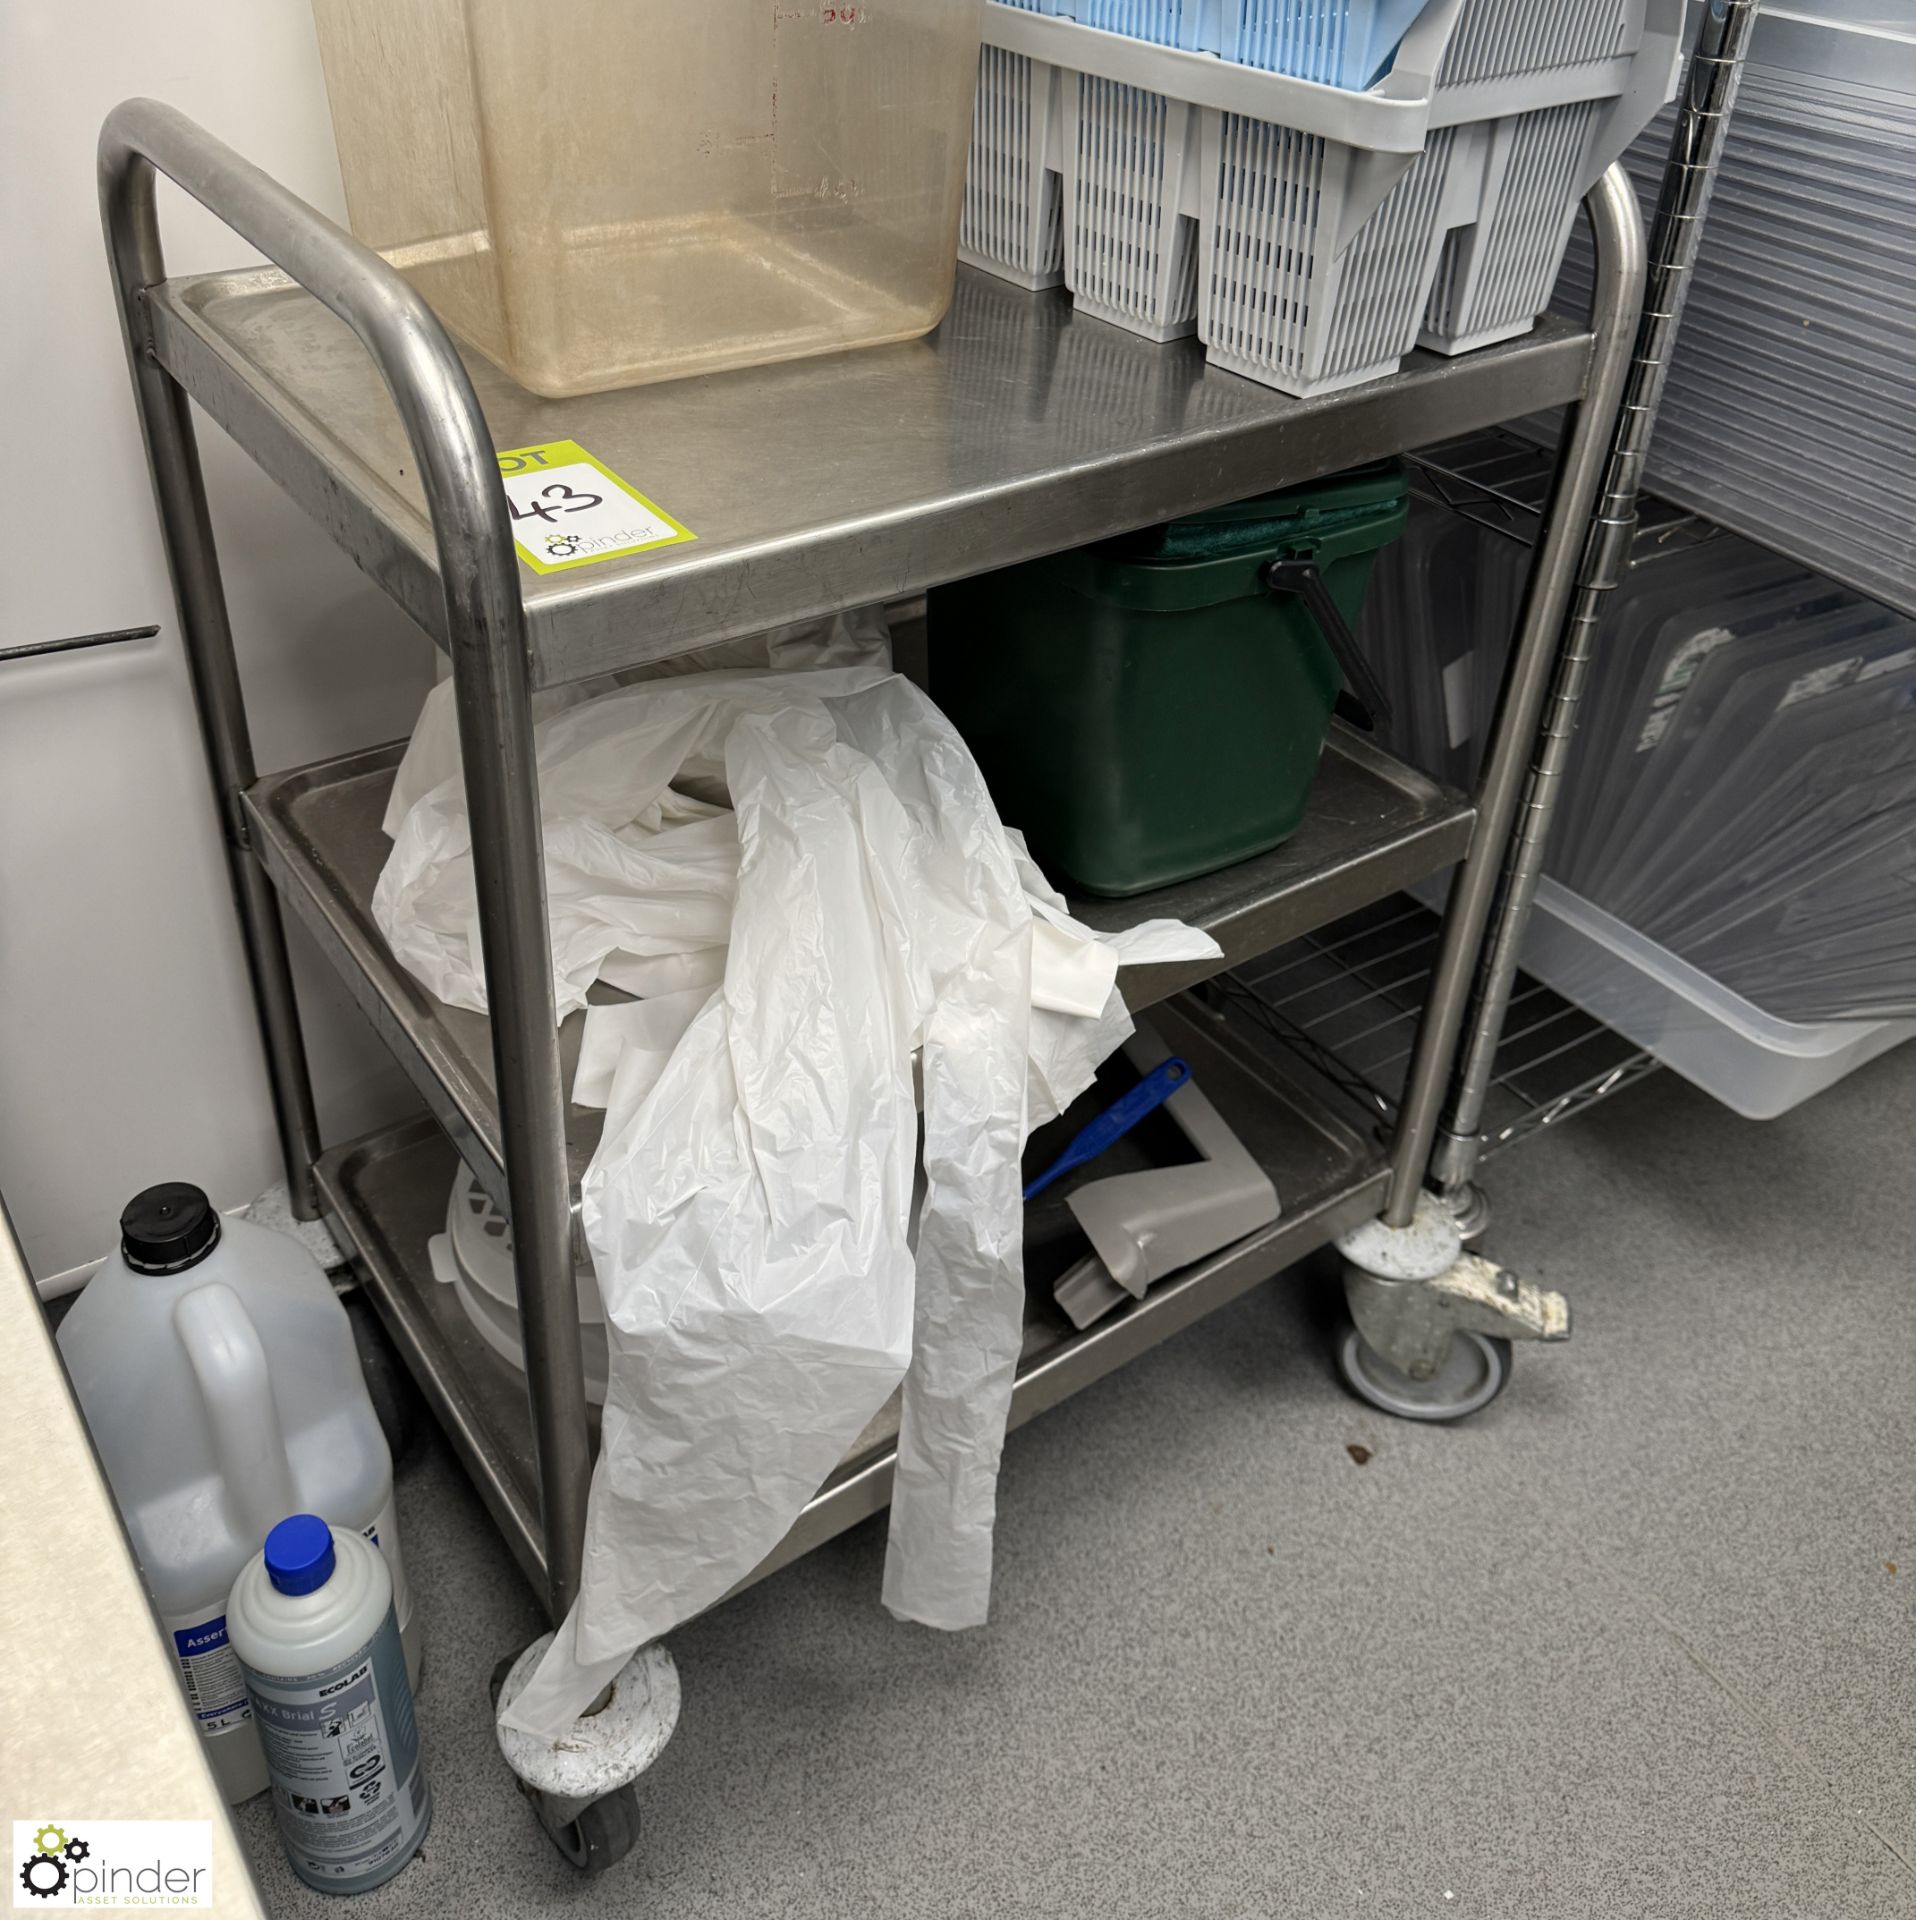 Stainless steel 3-tier Serving Trolley (location in building – basement kitchen 2) - Image 2 of 3